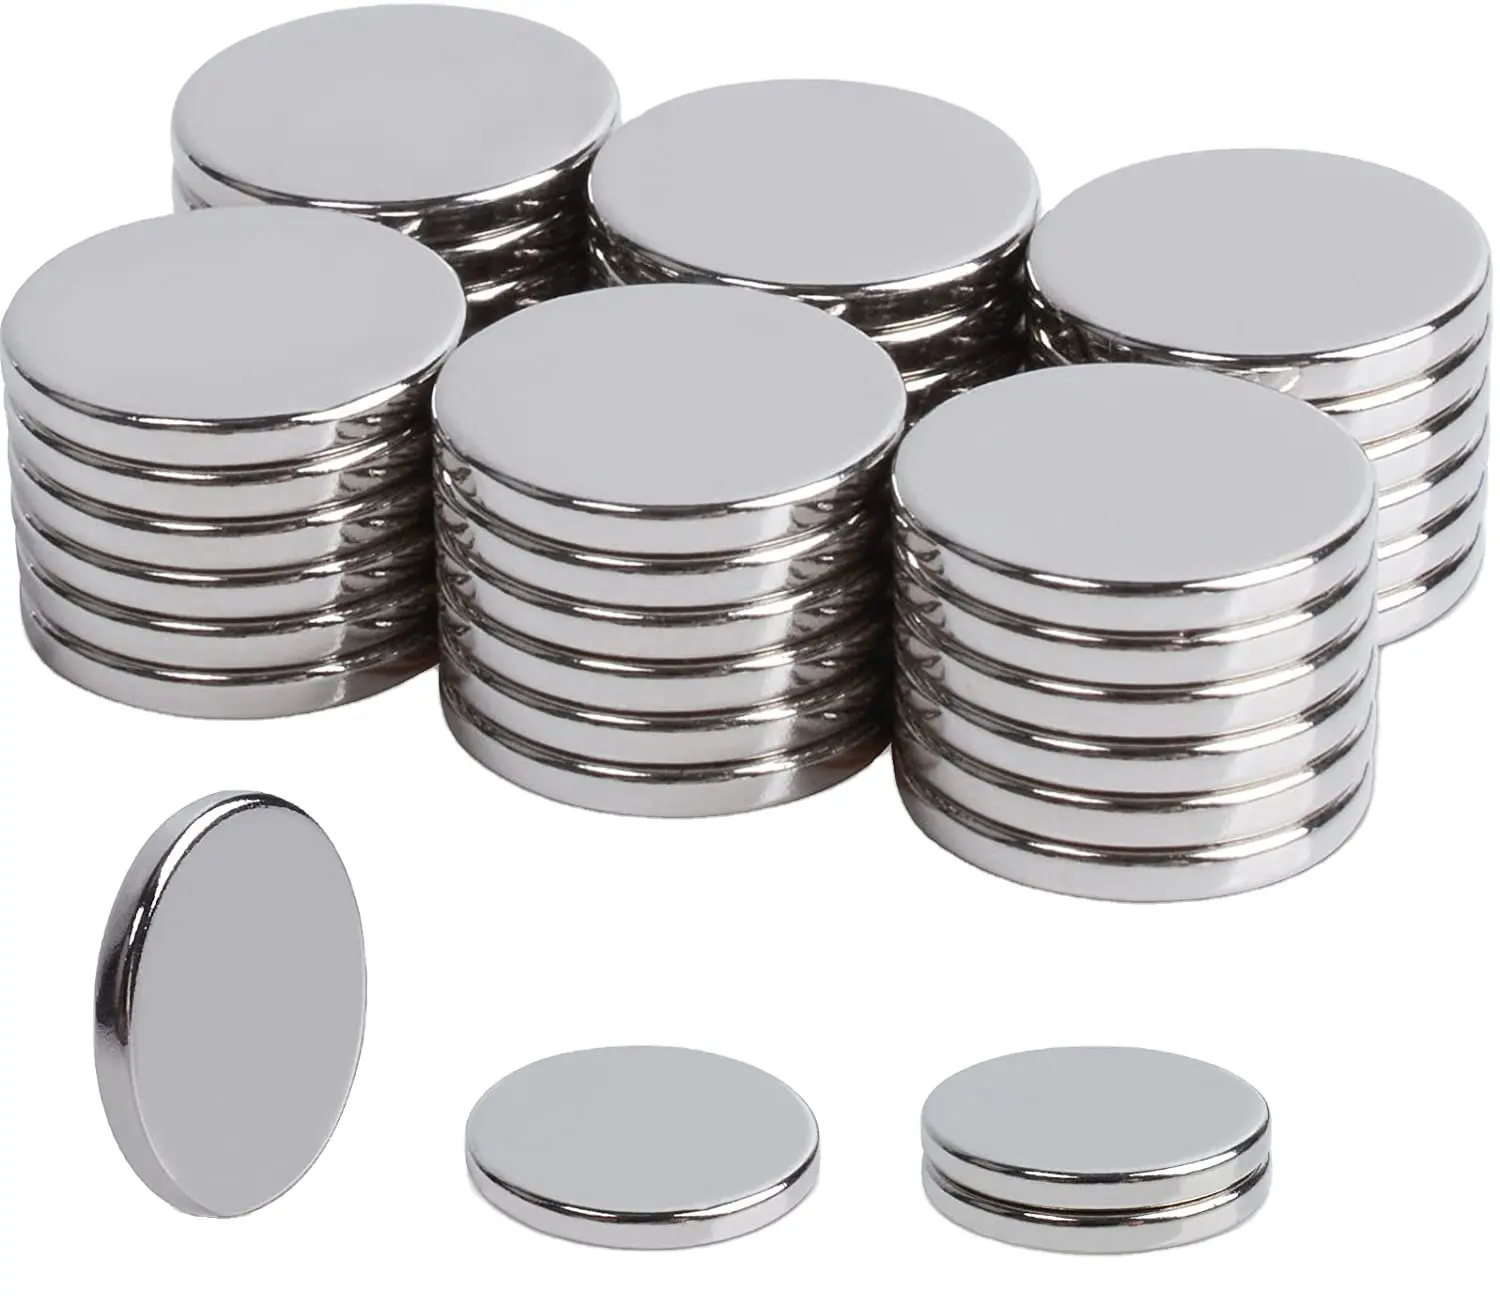 New Products Good Price Disc Round Flat Neodymium Magnets for Kitchen Office Whiteboard